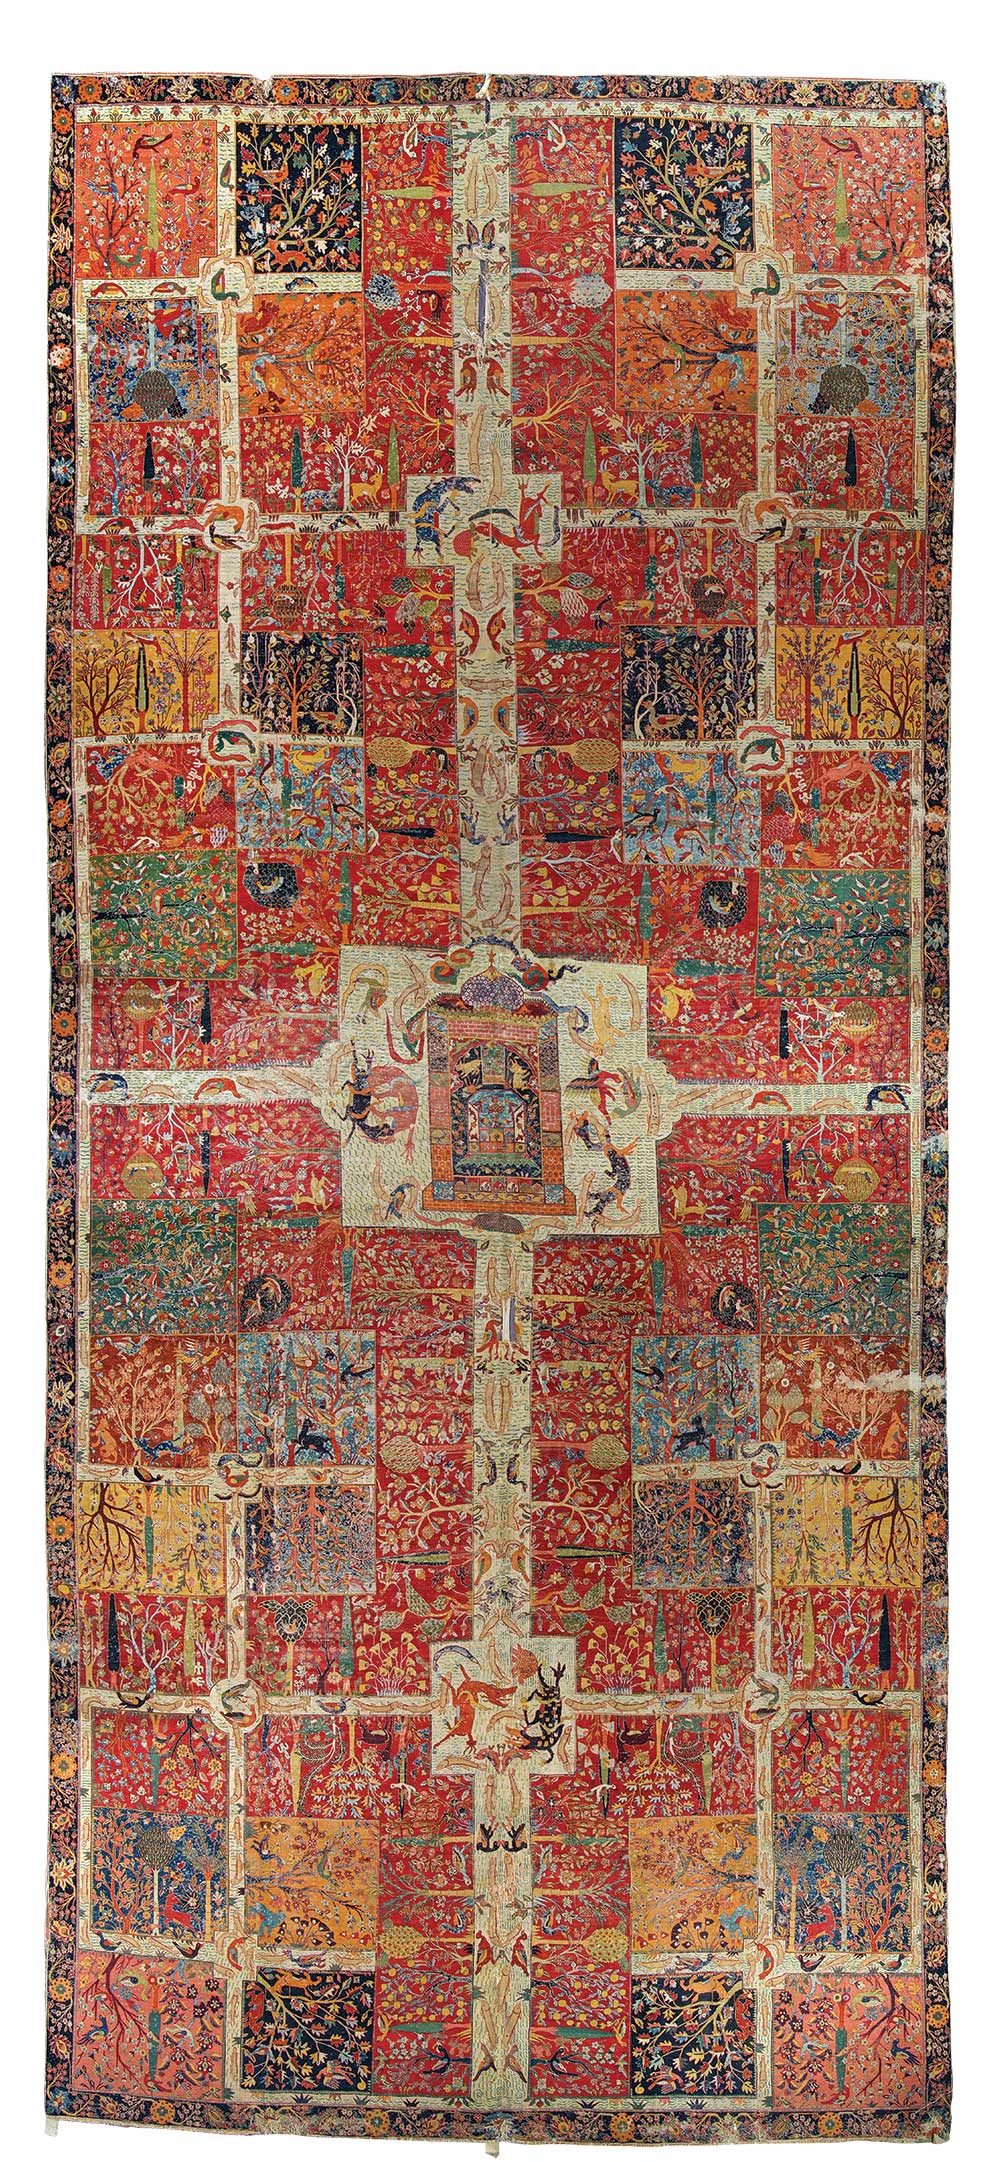 Safavid chaharbagh carpet, Kerman, south Persia, late 16th or early 17th century. Asymmetrically wool pile, ca. 4,700 knots/dm2 (ca. 305/in2) on Z4S ivory cotton warps, alternately depressed, and 3 weft shoots of multicoloured fine wool, cotton and silk wefts, 3 shoots, 3.84 x 8.53m (12'7" x 28'0"). According to Chandramani Singh the garden carpet was purchased in 1632 by Mirza Raja Jai Singh from Lahore for the Amber Palace (Treasuresofthe AlbertHallMuseum, Jaipur, Ahmedabad 2009, p.103). Albert Hall Museum, Jaipur, no.681/225. Photo courtesy Government of Rajasthan Department of Archaeology and Museums/Mapin Publishing